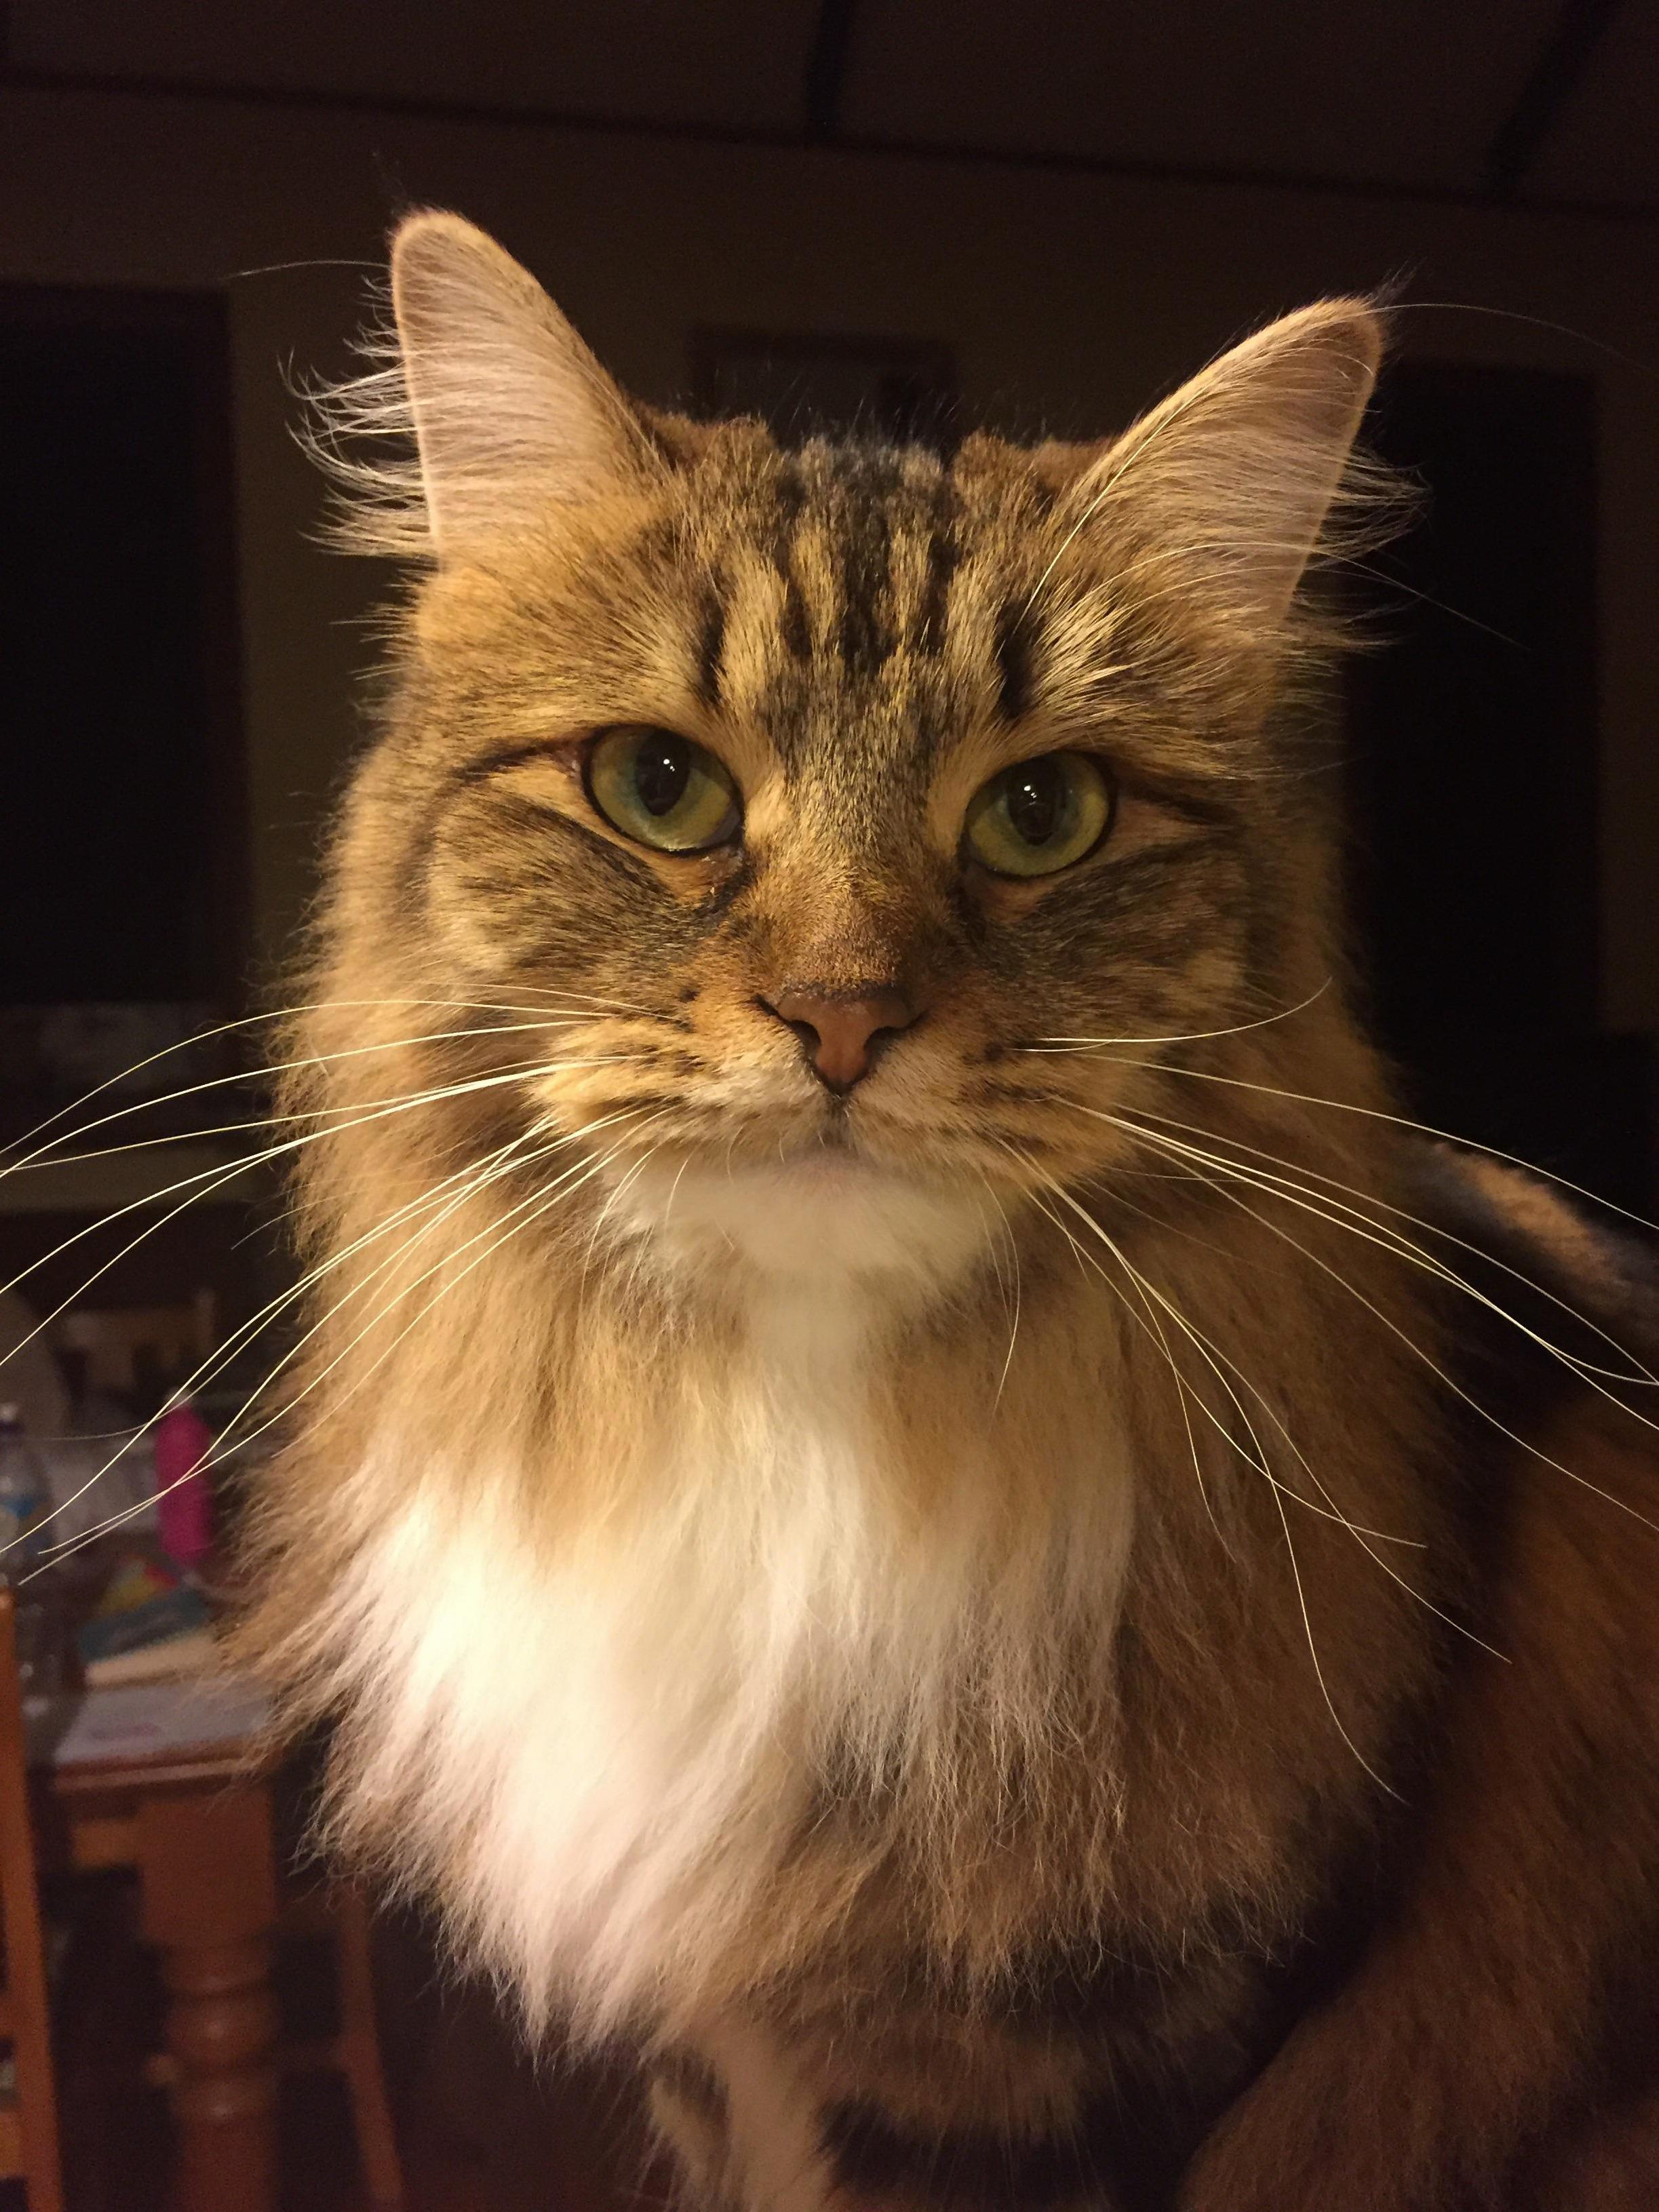 My beautiful margo the siberian – finally ready for her close up after a year